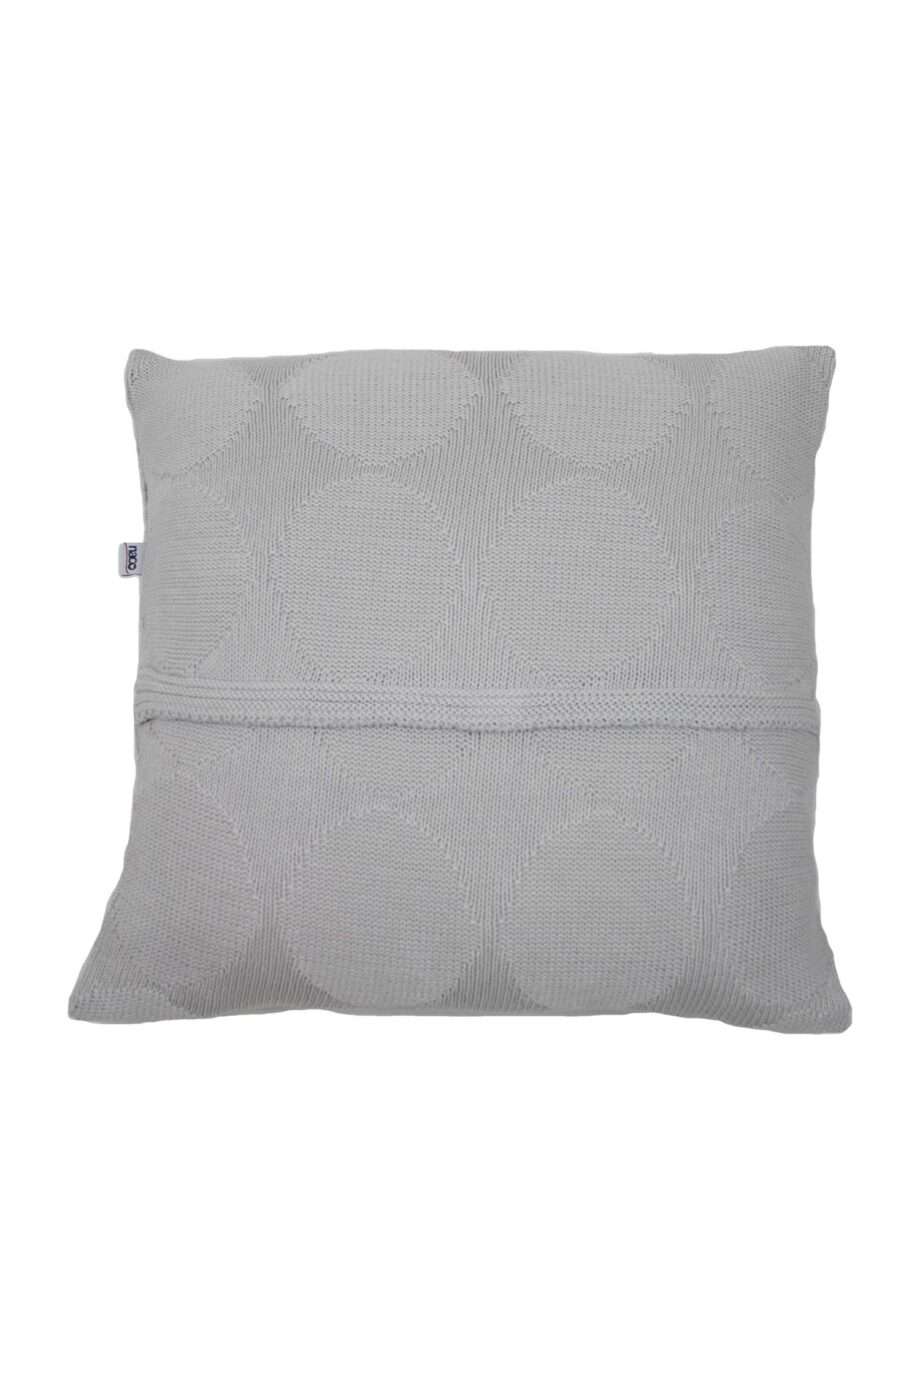 spots lilly white knitted cotton pillowcase xsmall